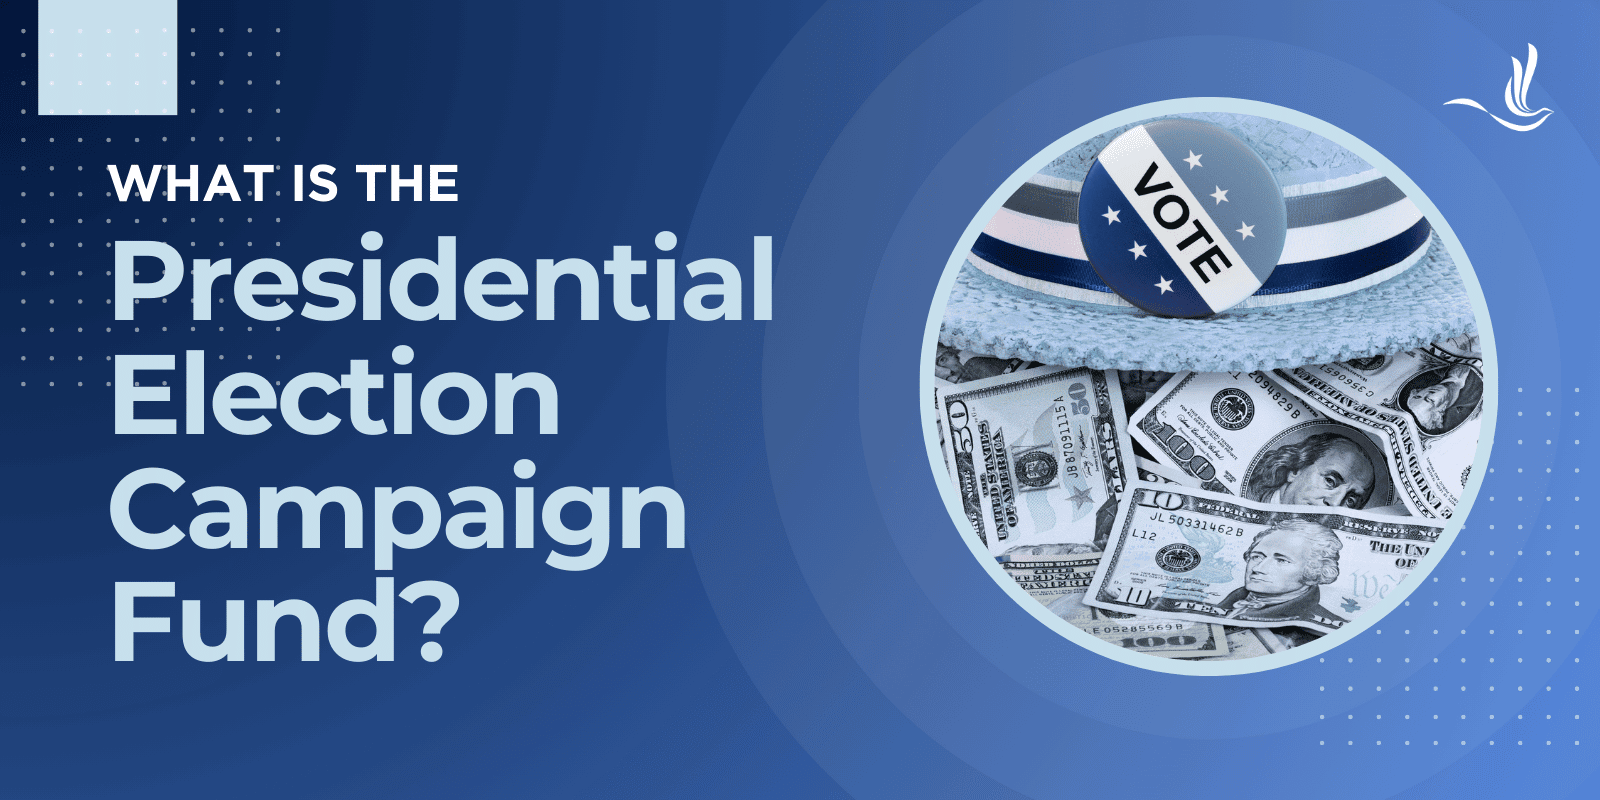 what is the presidential election campaign fund